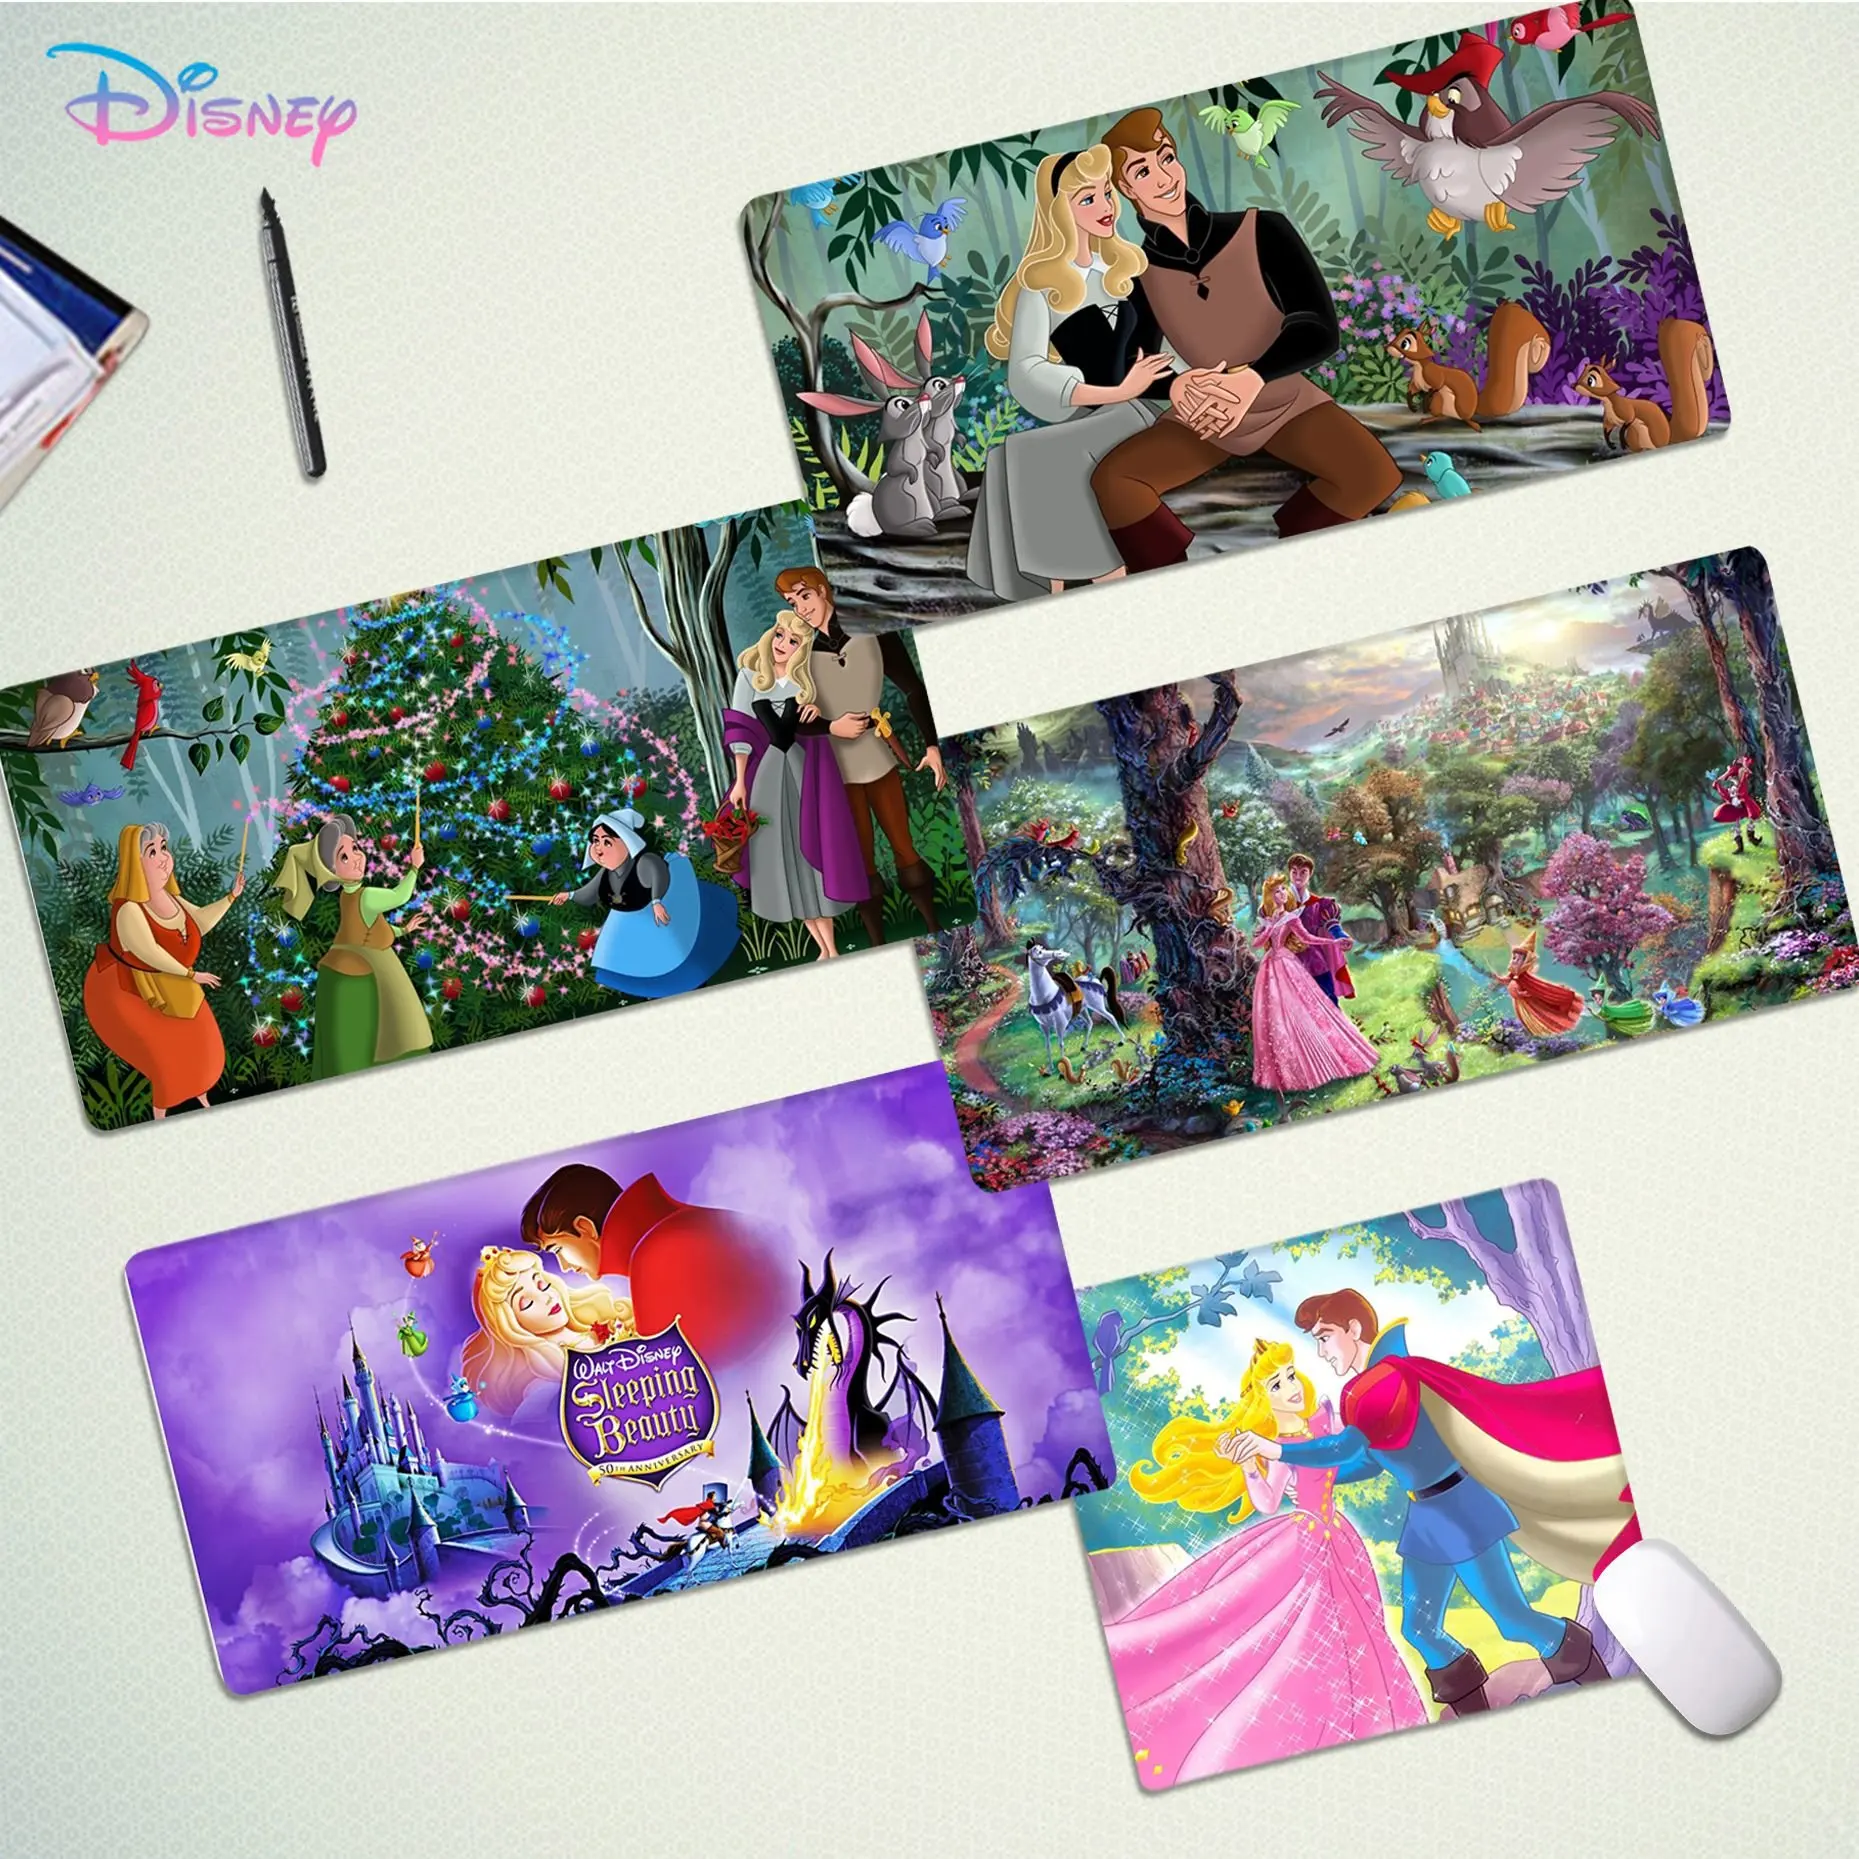 

Disney Sleeping Beauty Top Quality Gamer Speed Mice Retail Small Rubber Mousepad Size For Keyboards Mat Boyfriend Gift